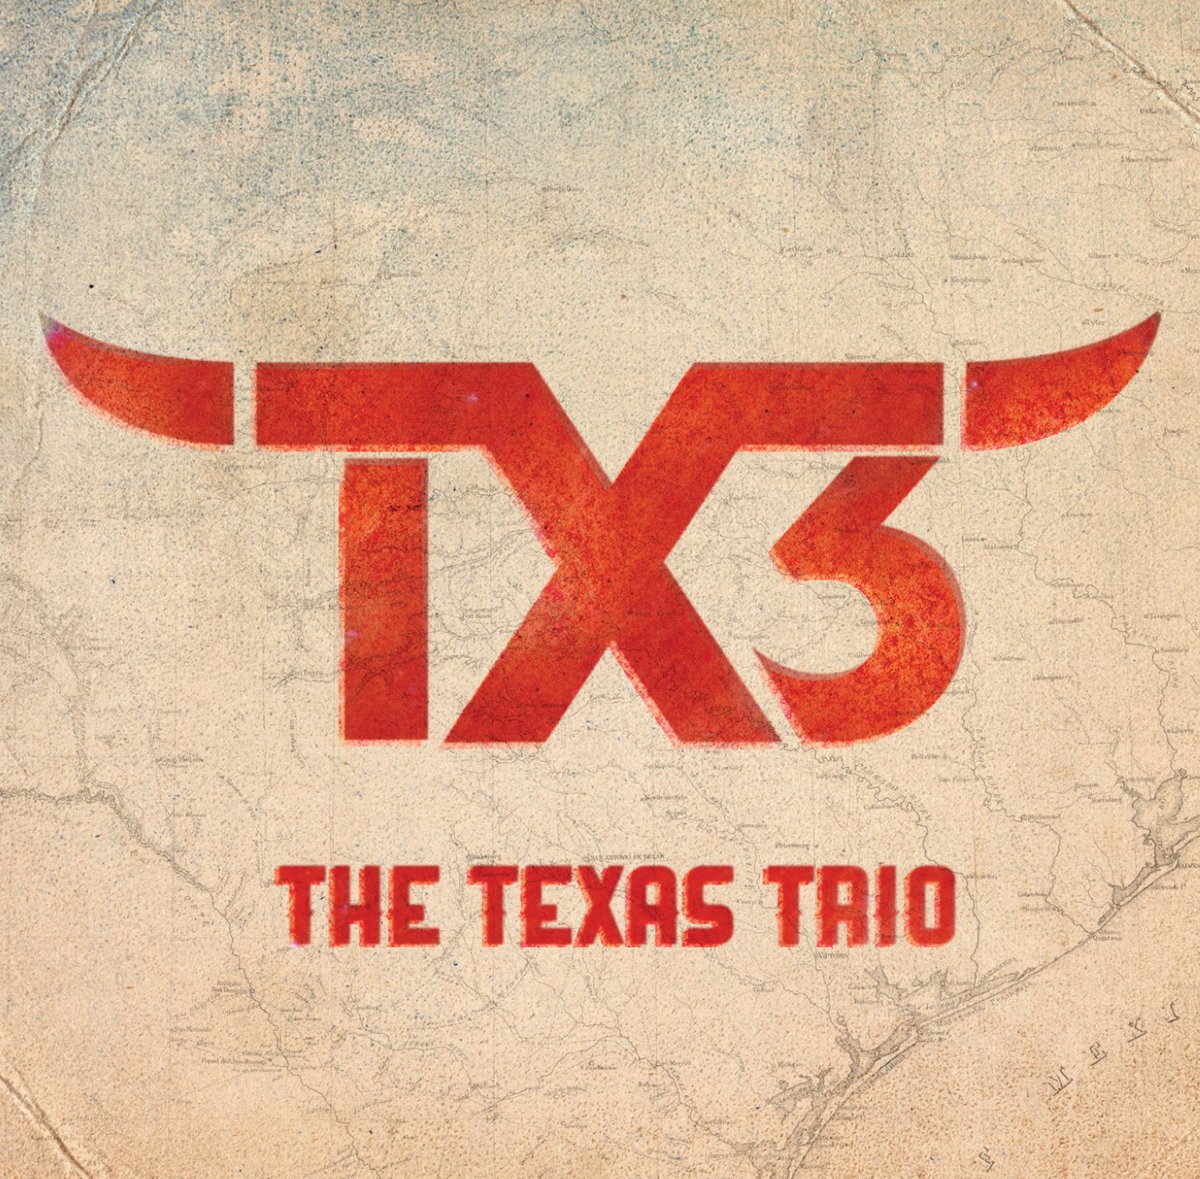 🚨NEW ALBUM ALERT! I’m super pumped to announce The Texas Trio’s debut album is OUT NOW! If you know me well, then you know how much I love western swing & traditional country music. I couldn’t be more proud of this album & this band. Give it a listen! 🤠 sym.ffm.to/ttt_thetexastr…